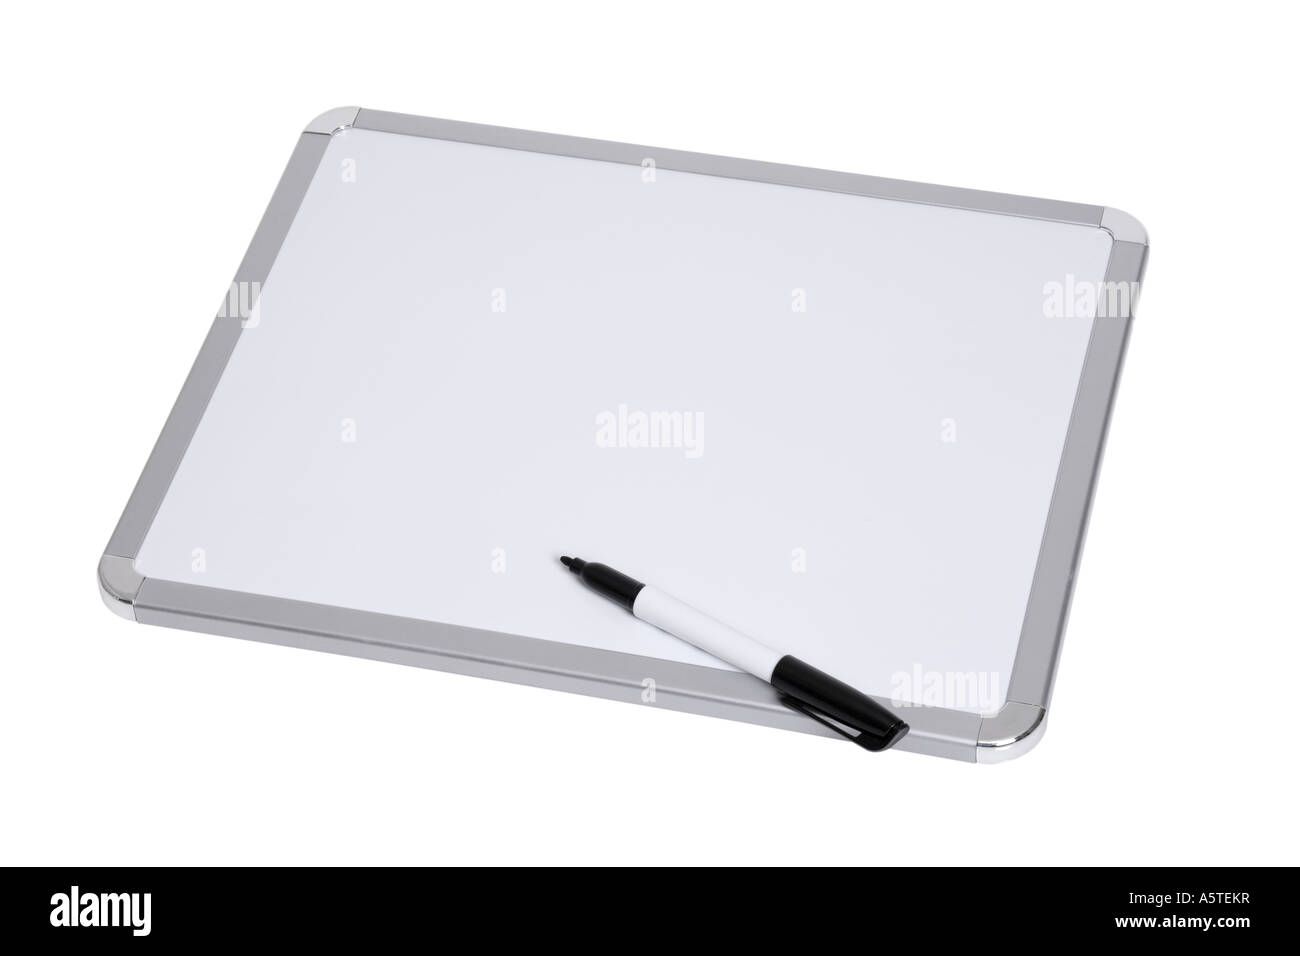 Blank dry erase board with pen cut out on white background Stock Photo